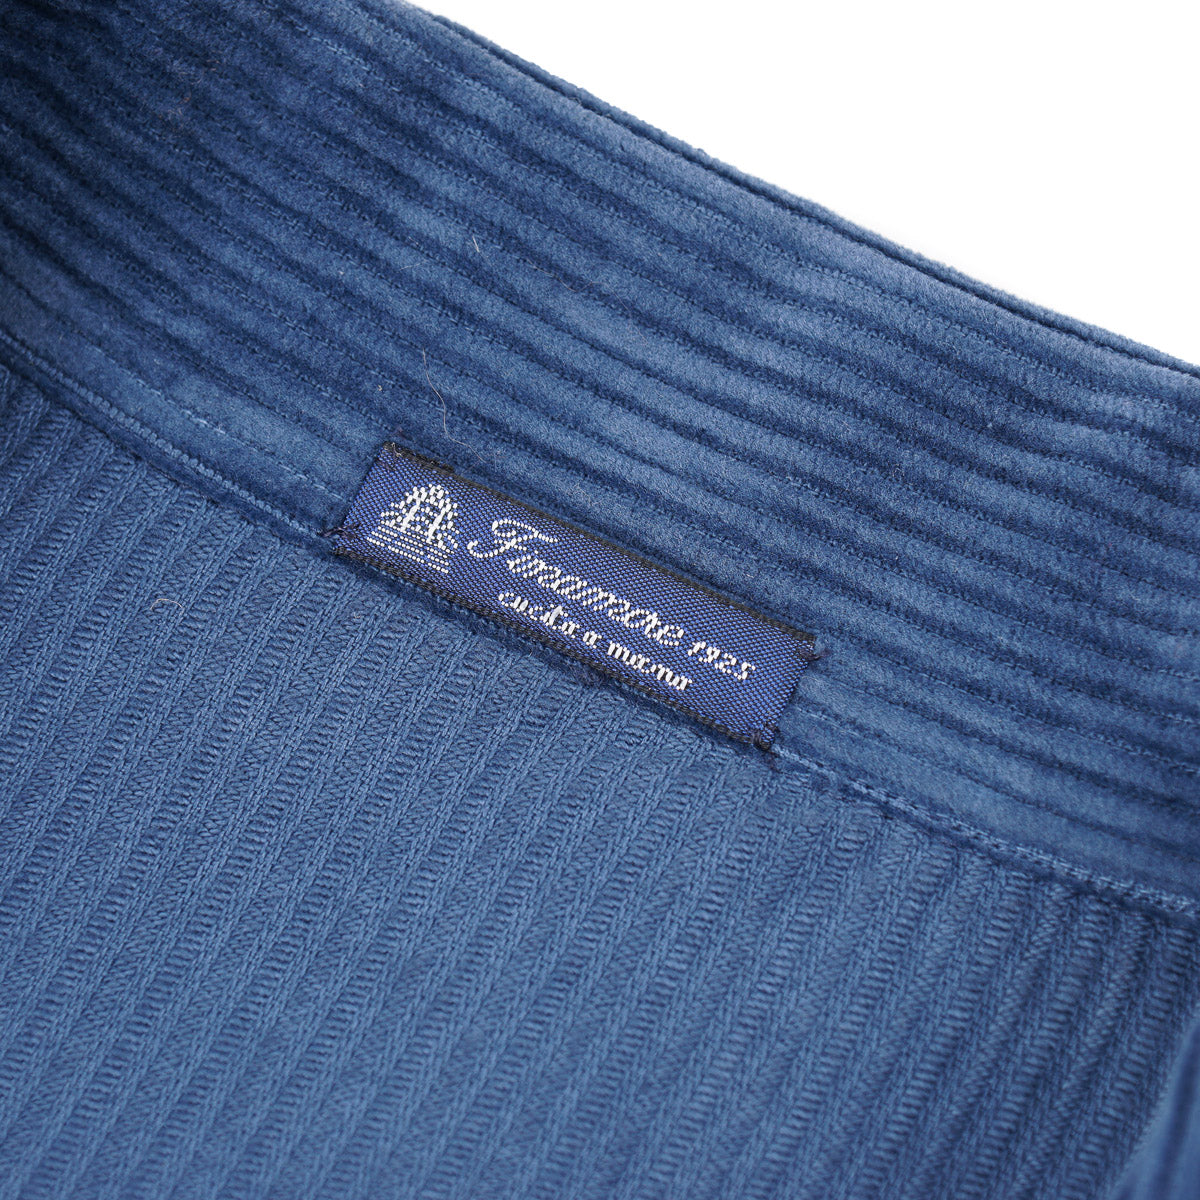 Finamore Relaxed-Fit Casual Corduroy Jacket - Top Shelf Apparel